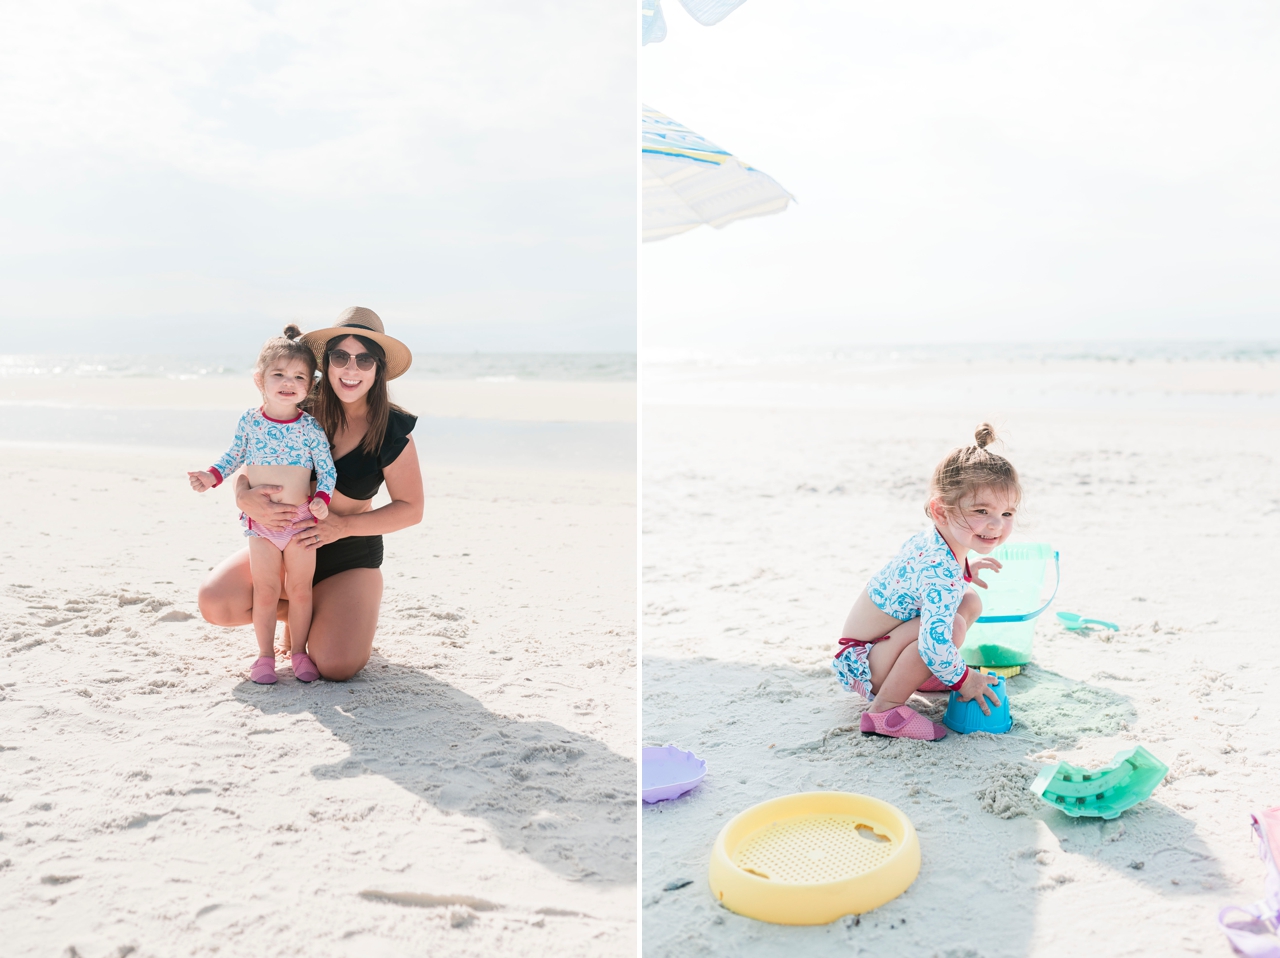 brittney naylor and daughter on the beach in gulf shores alabama, family vacation